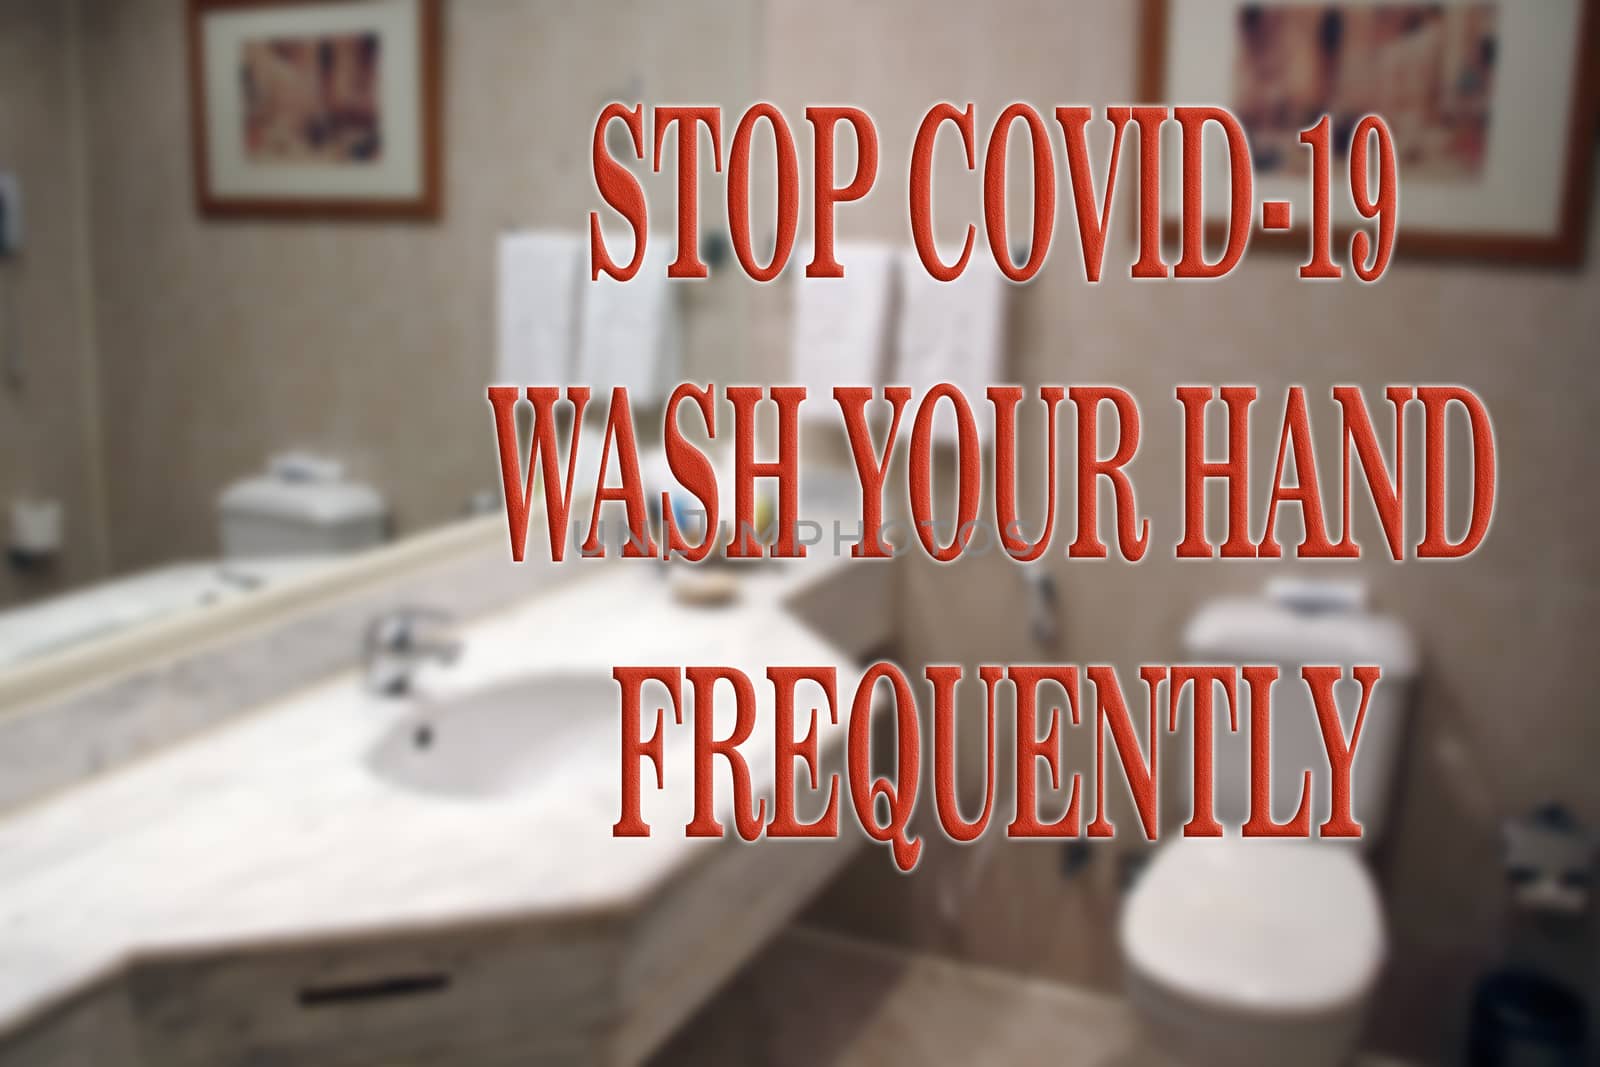 A text that reminds you of hygiene. Hand washing helps in fighting bacteria and preventing the COVID-19 virus. Blurred background of the bathroom interior.